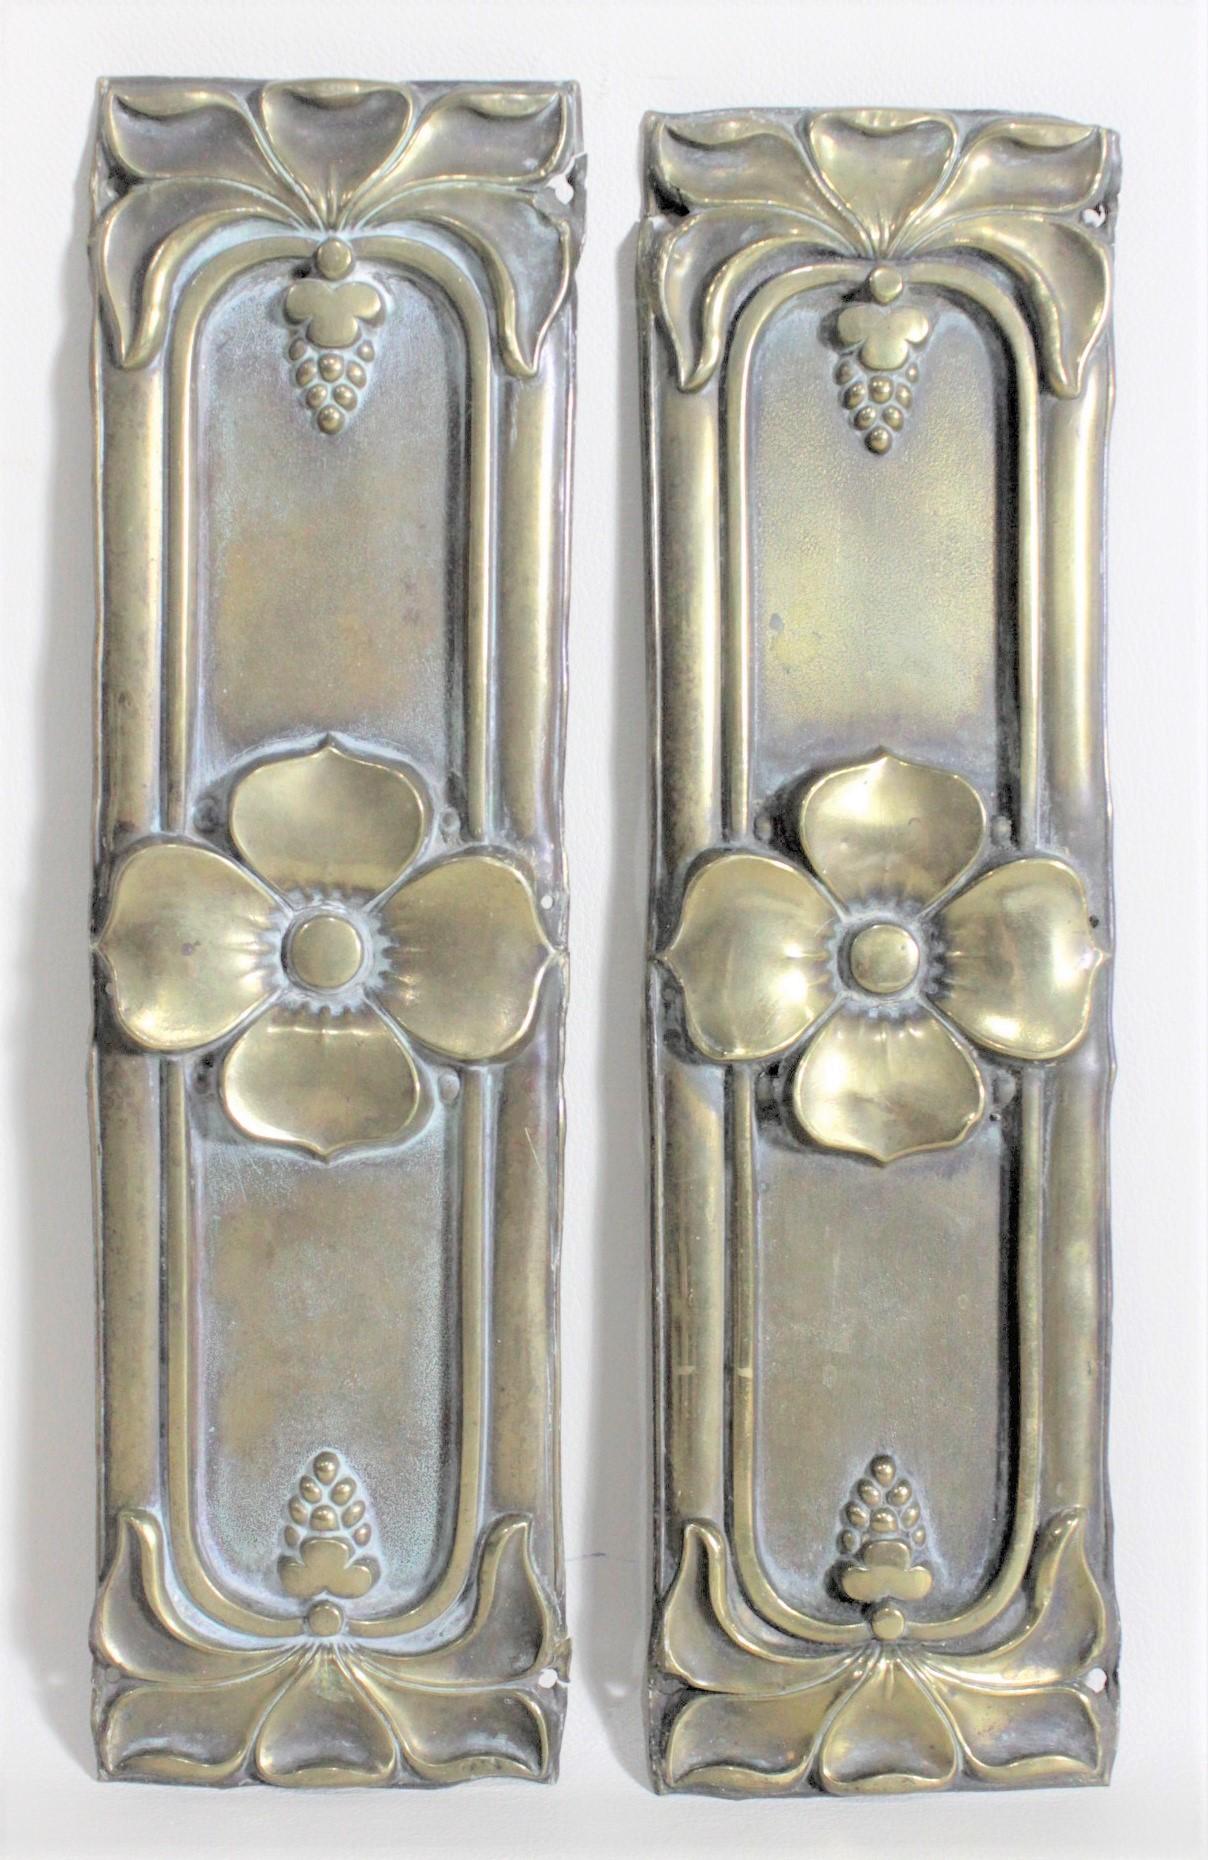 20th Century Pair of Antique Brass Art Nouveau Door Push Plates with Fruit and Floral Accents